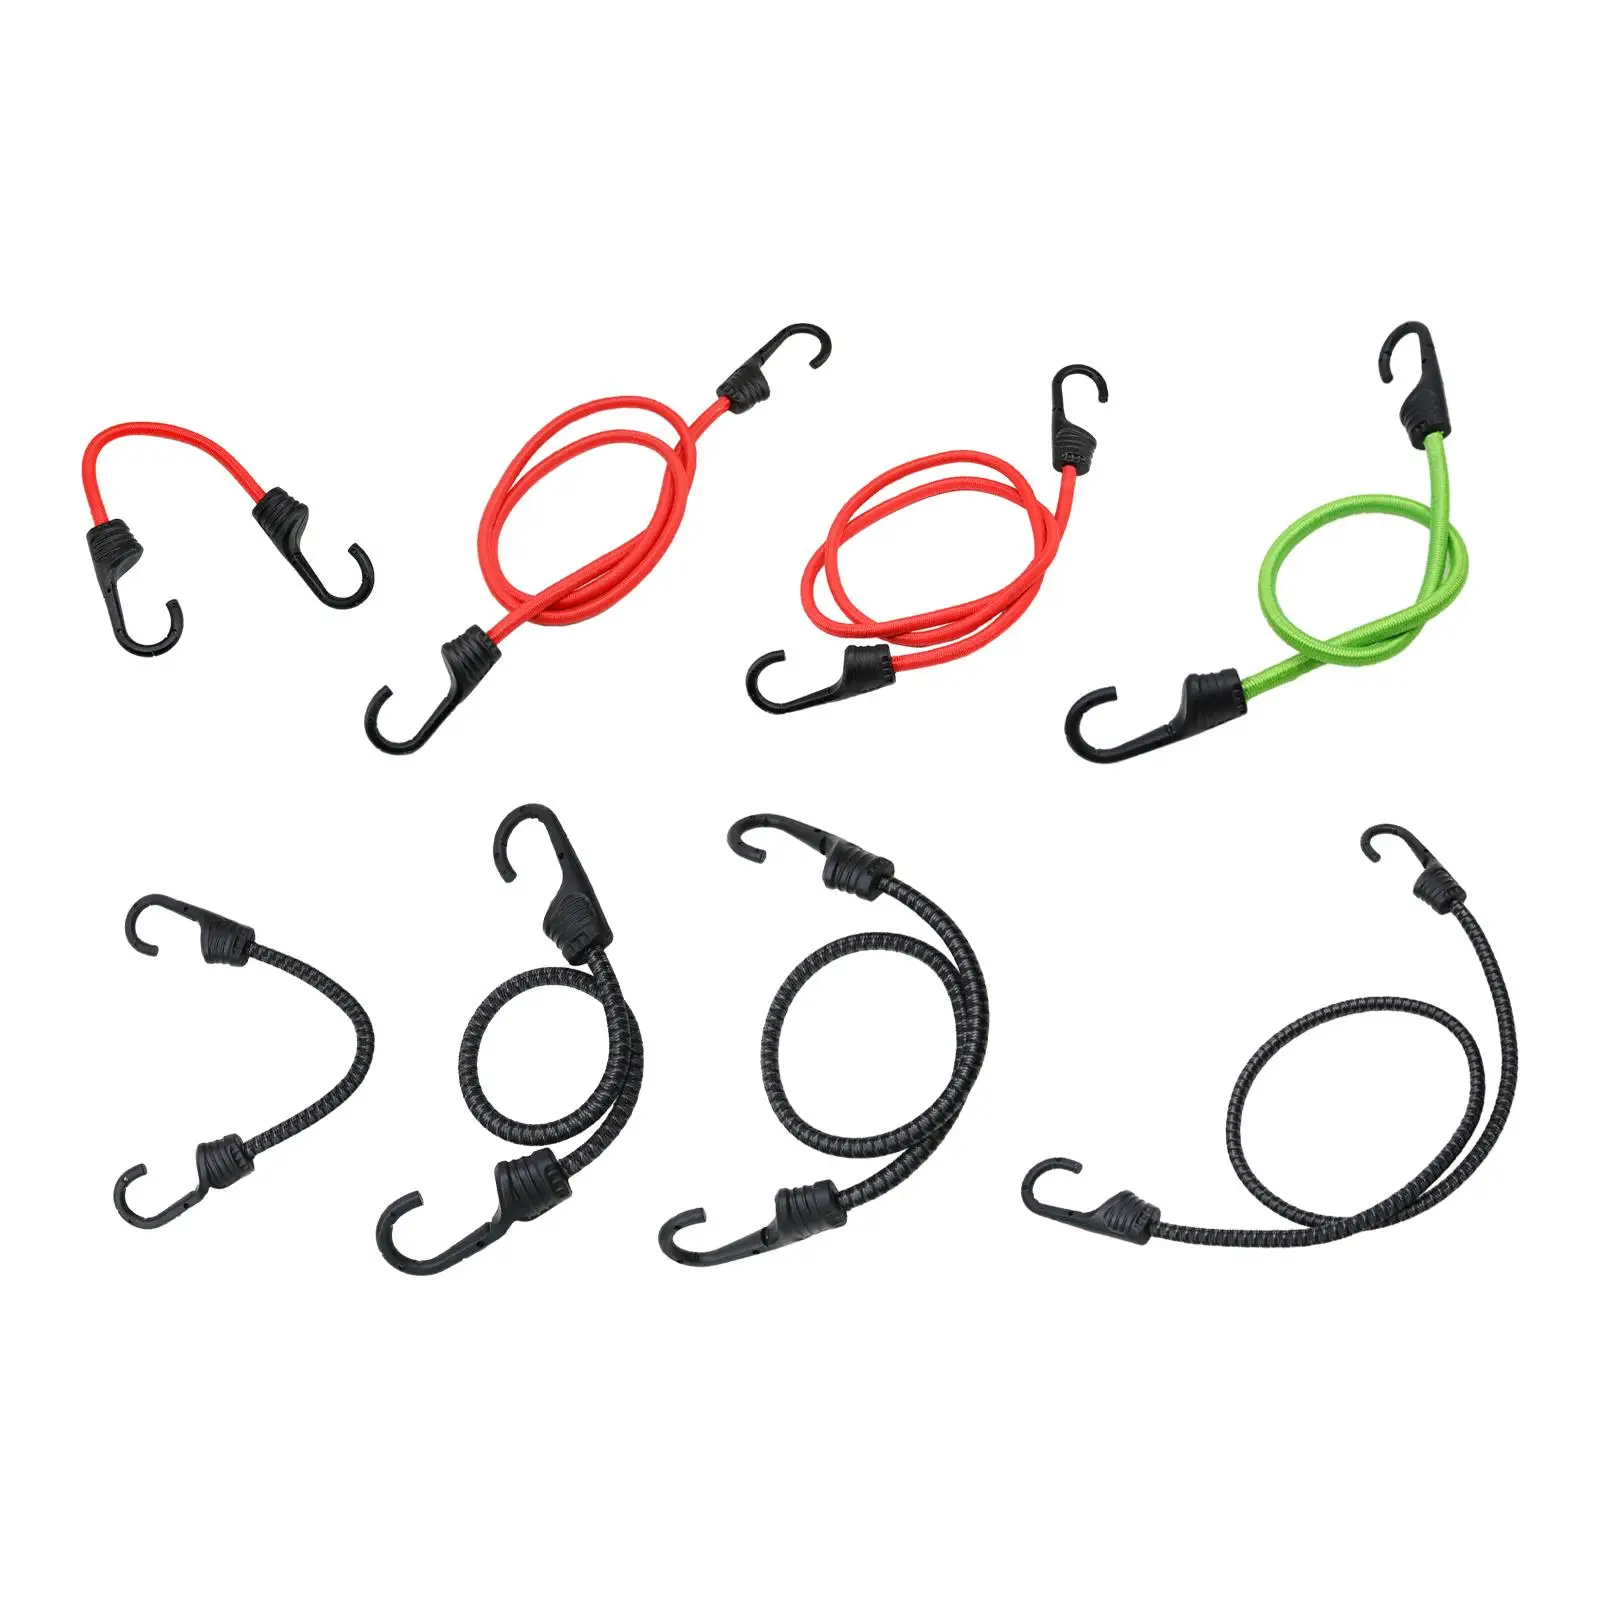 Bicycle Bungee Cord Elastic Strap Fixed with Hooks Motorcycle Rope Luggage Carrier Rope for Biking Hiking Riding Travel Outdoor